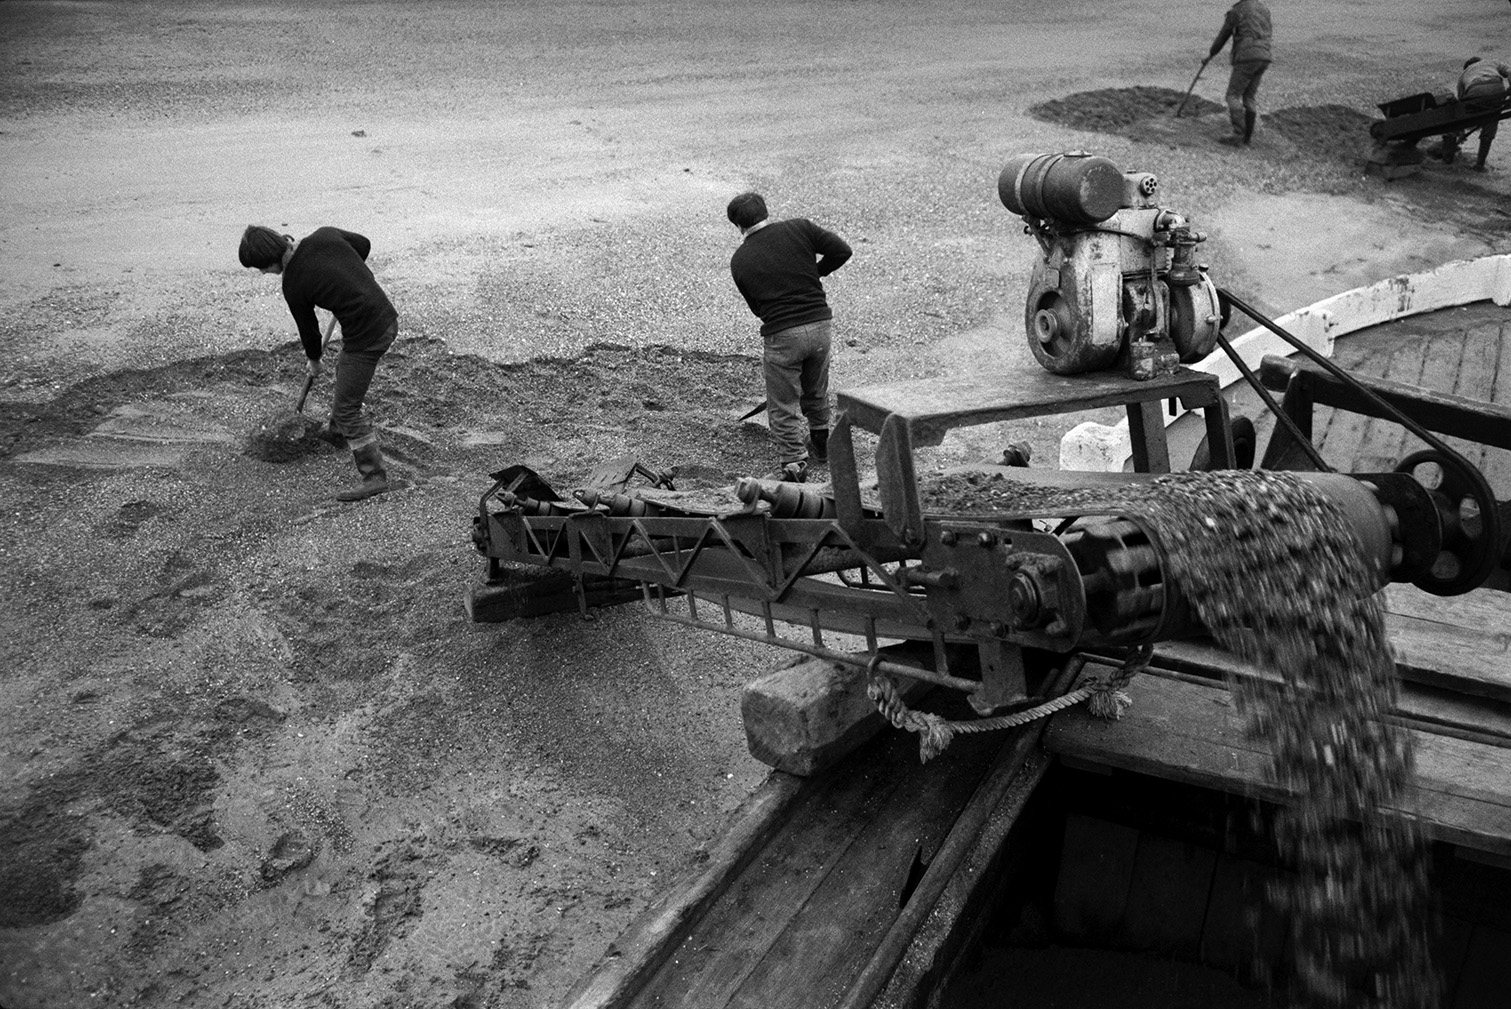 Men shovelling sand from the beach onto a conveyor belt or elevator attached to a sand barge at Crow Point, Braunton. The sand can be seen dropping into the barge at the top of the elevator.